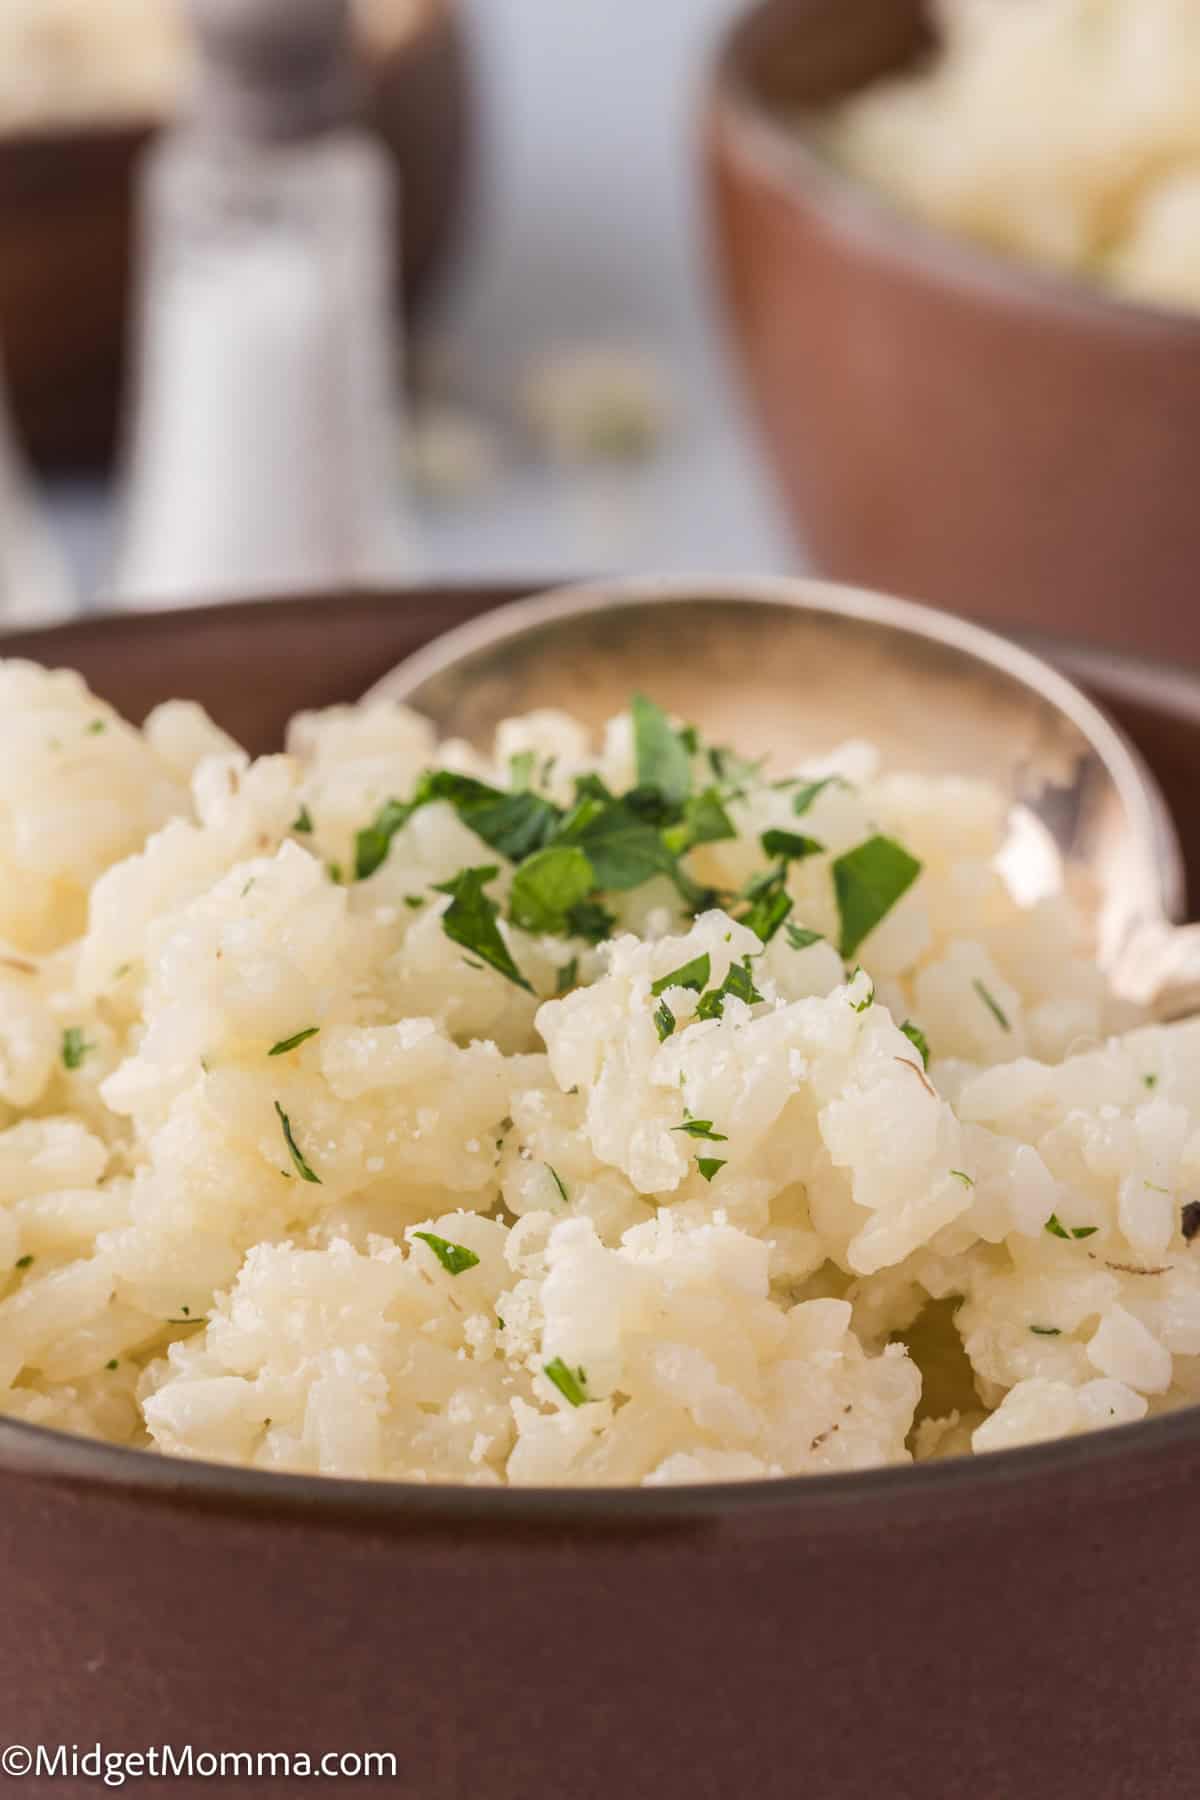 A bowl of parmesan rice garnished with chopped parsley, with a silver spoon, on a table with salt shaker visible in the background.